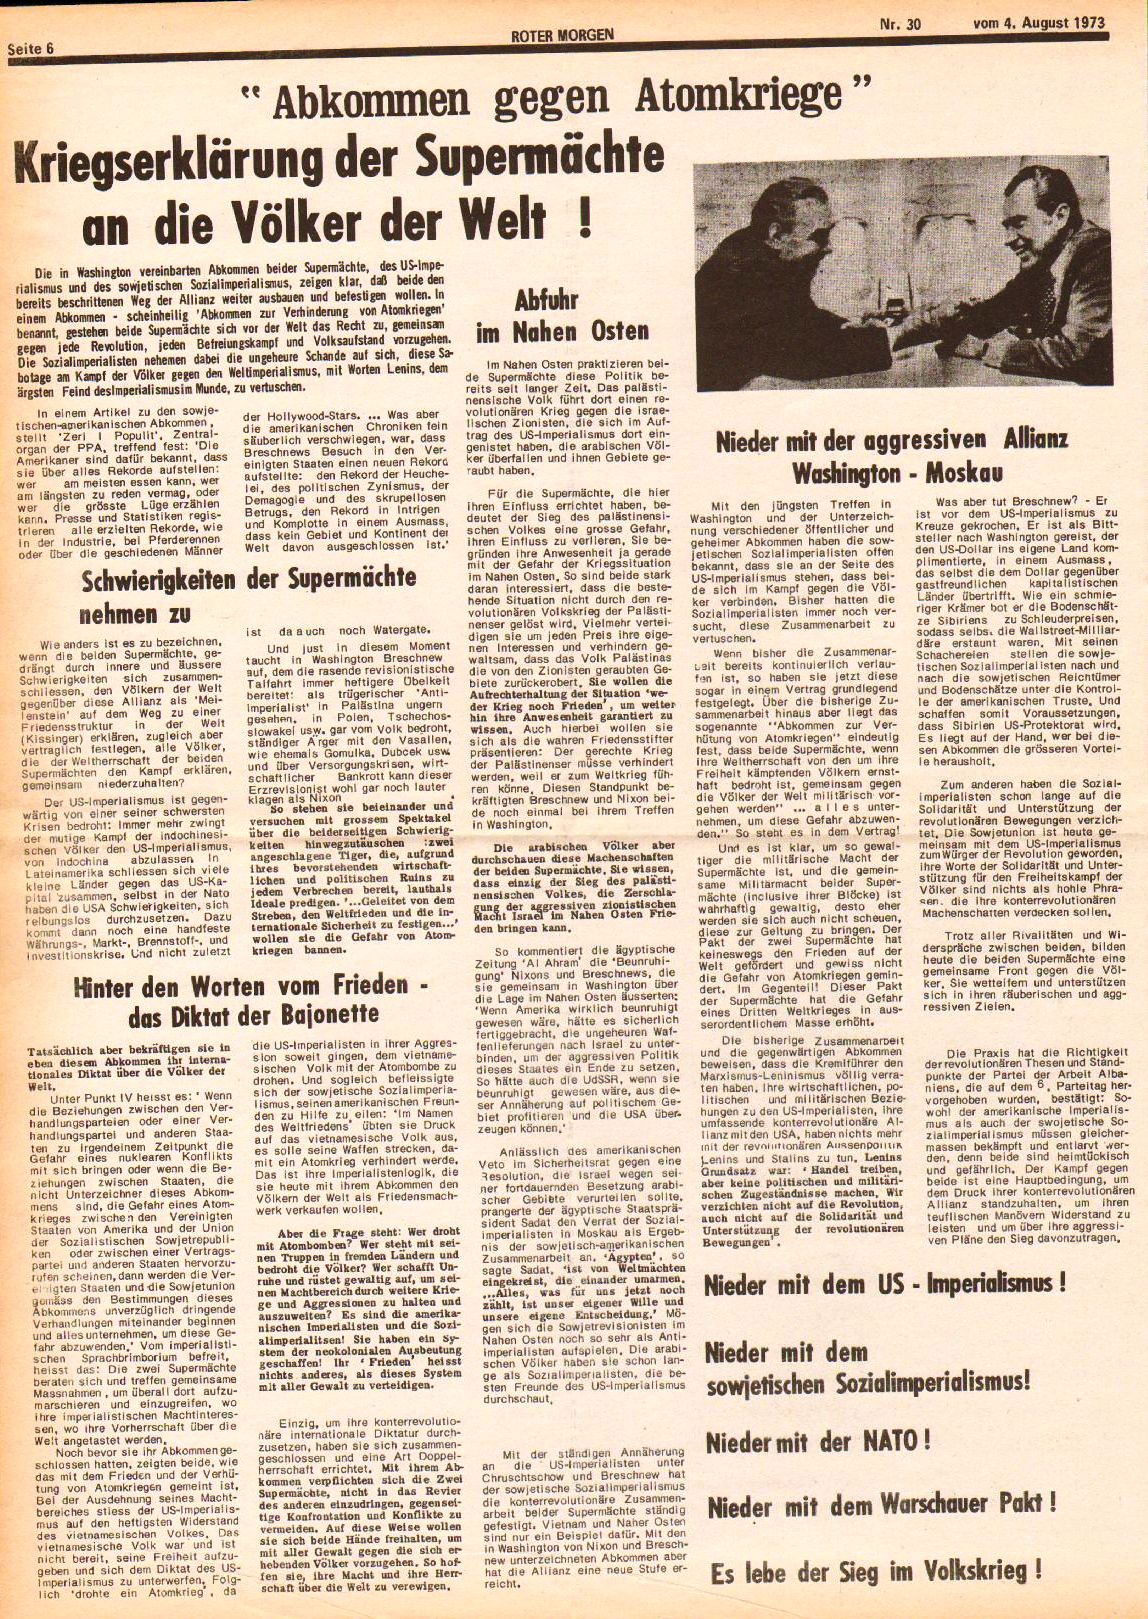 Roter Morgen, 7. Jg., 4. August 1973, Nr. 30, Seite 6